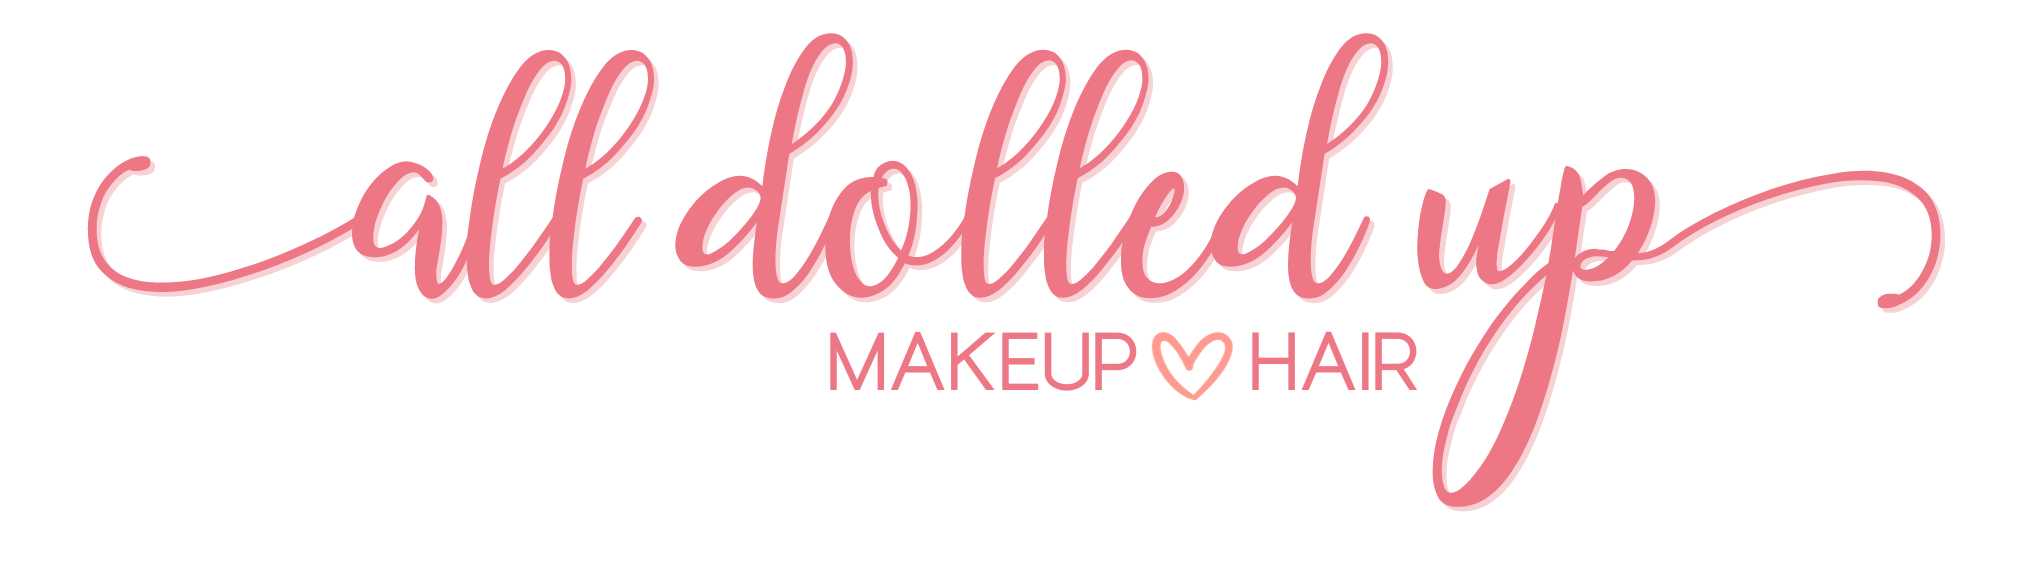 all dolled up's logo for hair and makeup in Austin, TX